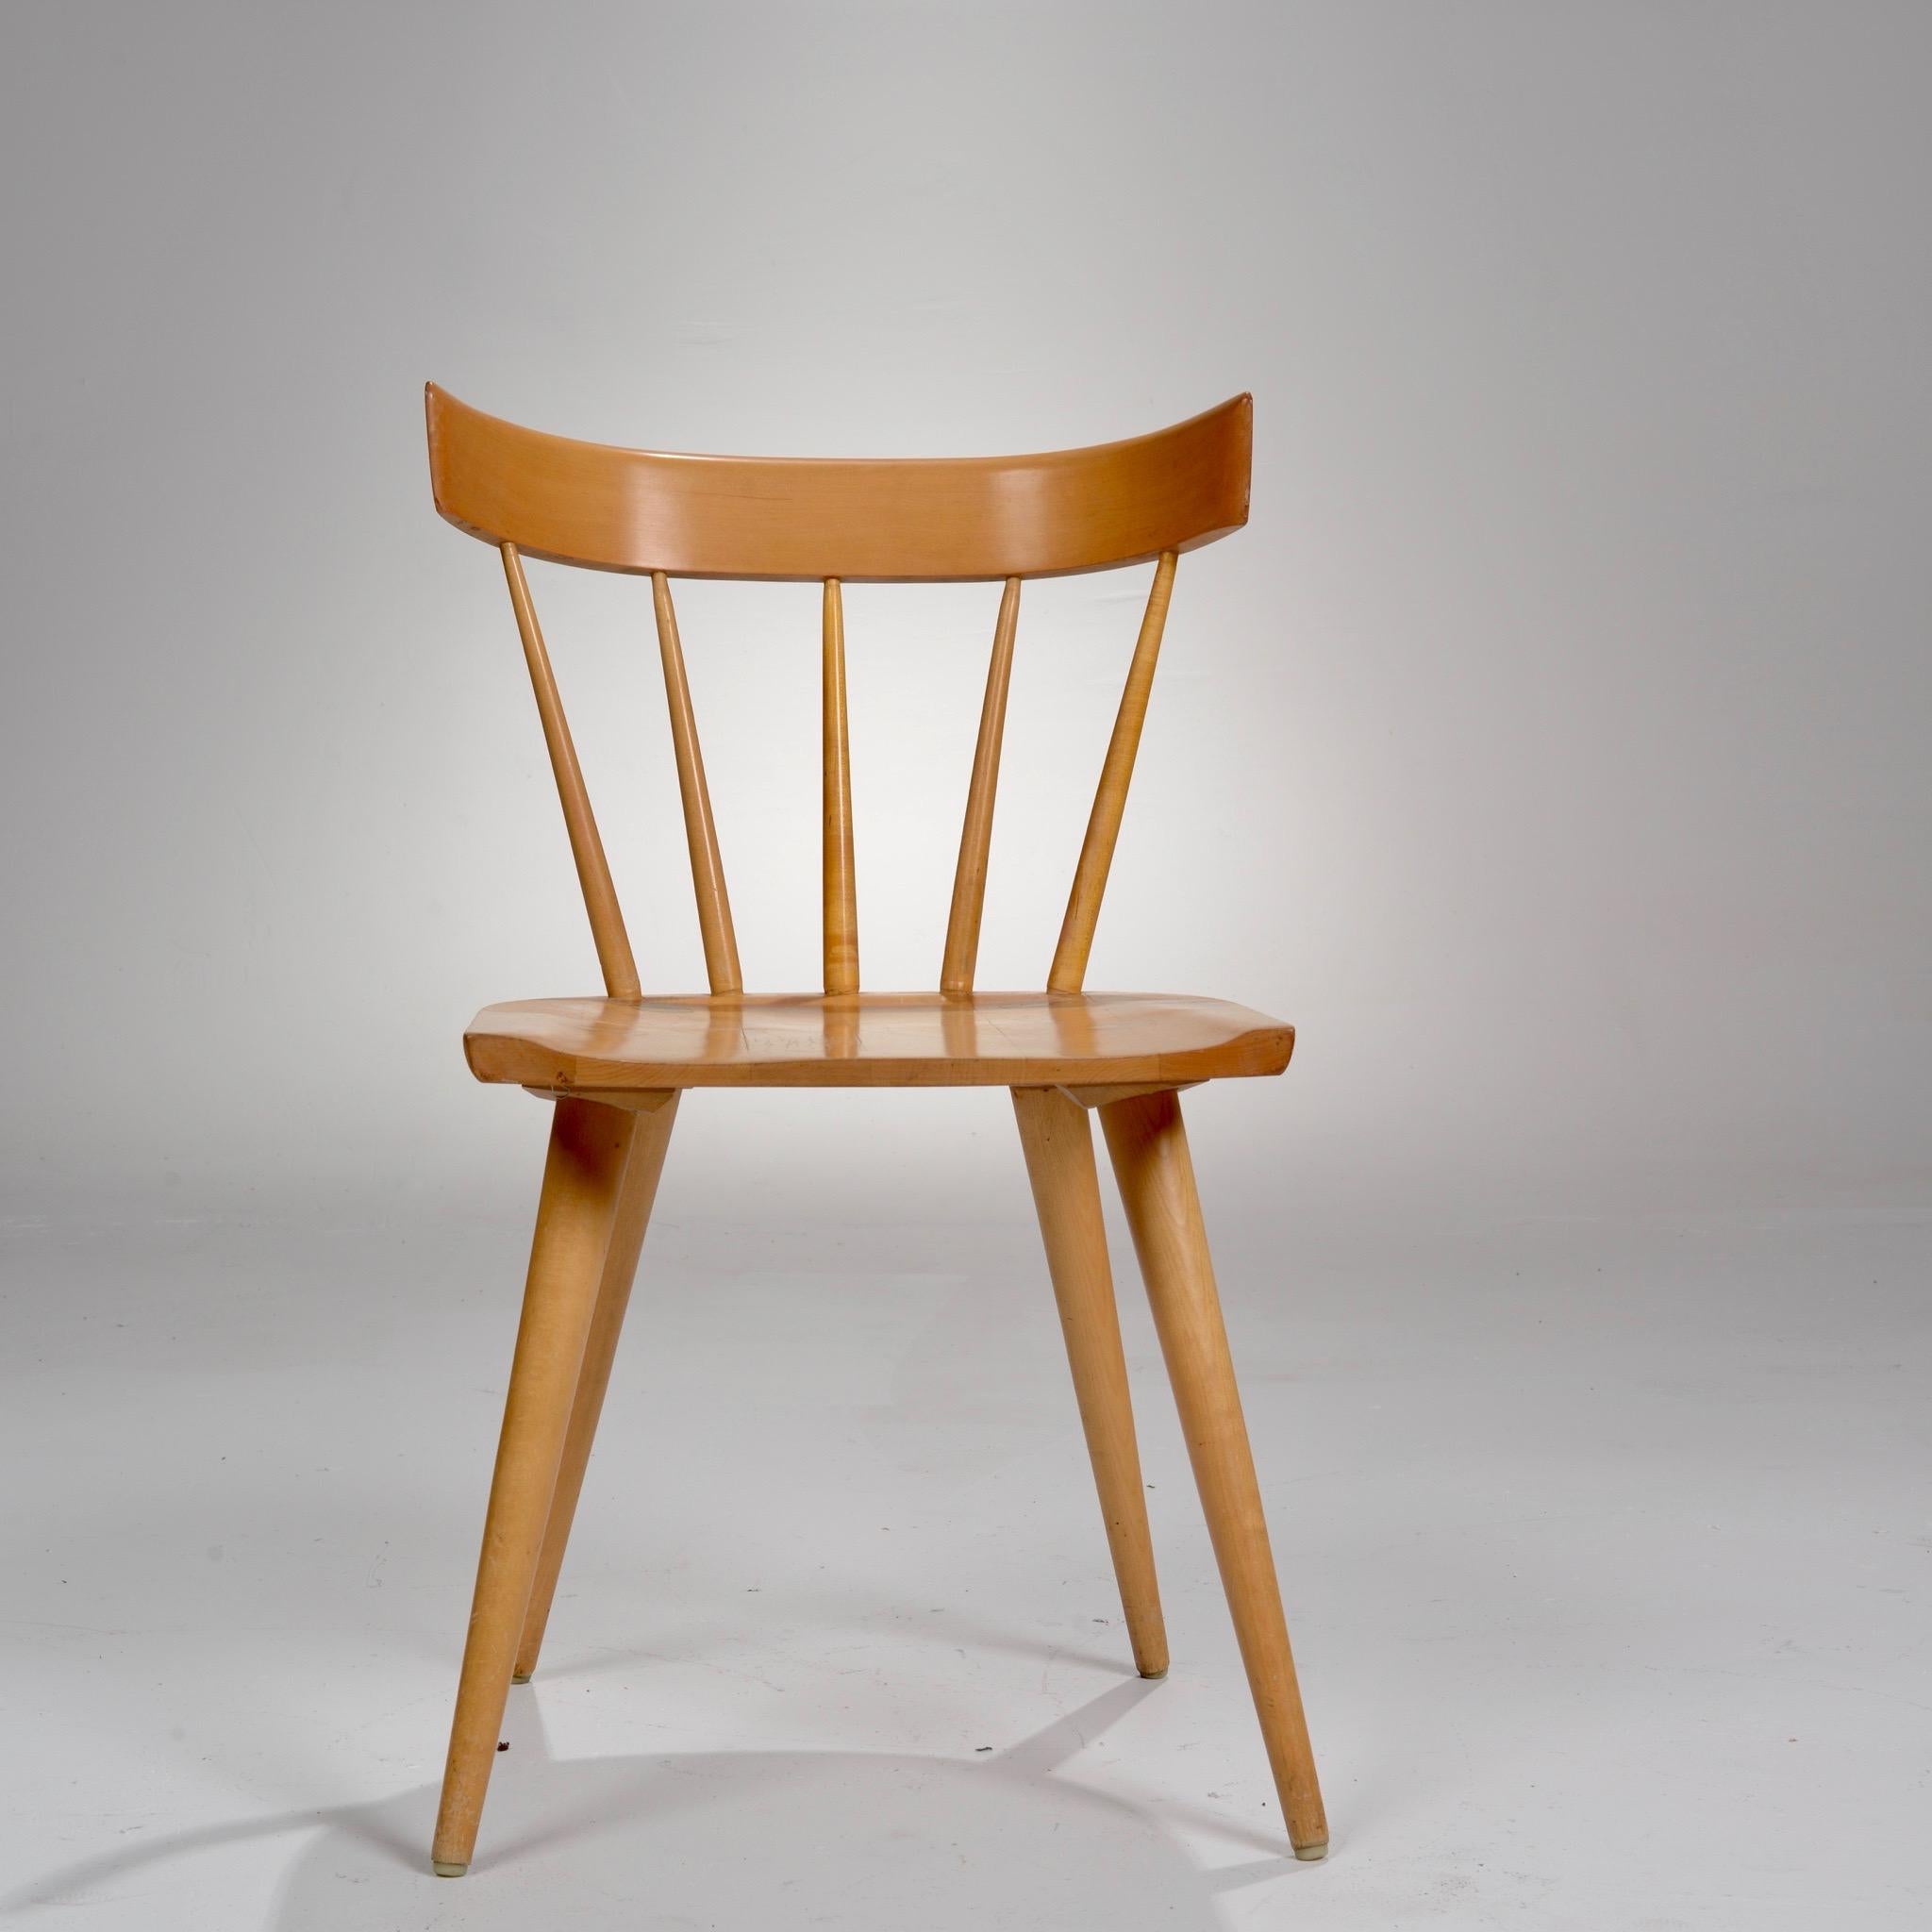 Mid-20th Century Spindle Back Planner Group Chair by Paul McCobb for Winchendon